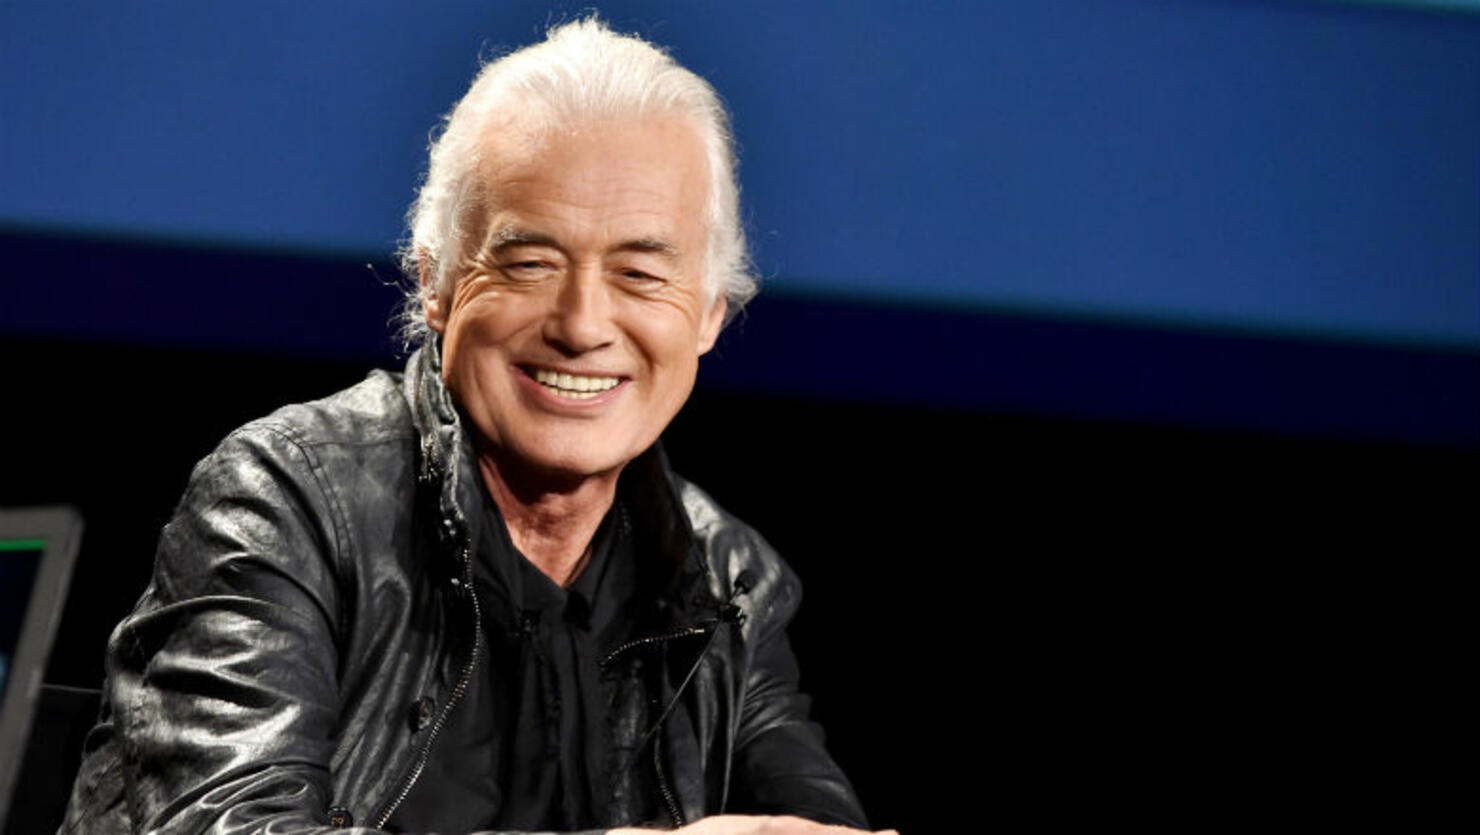 25 Things You Might Not Know About Birthday Boy Jimmy Page | iHeart